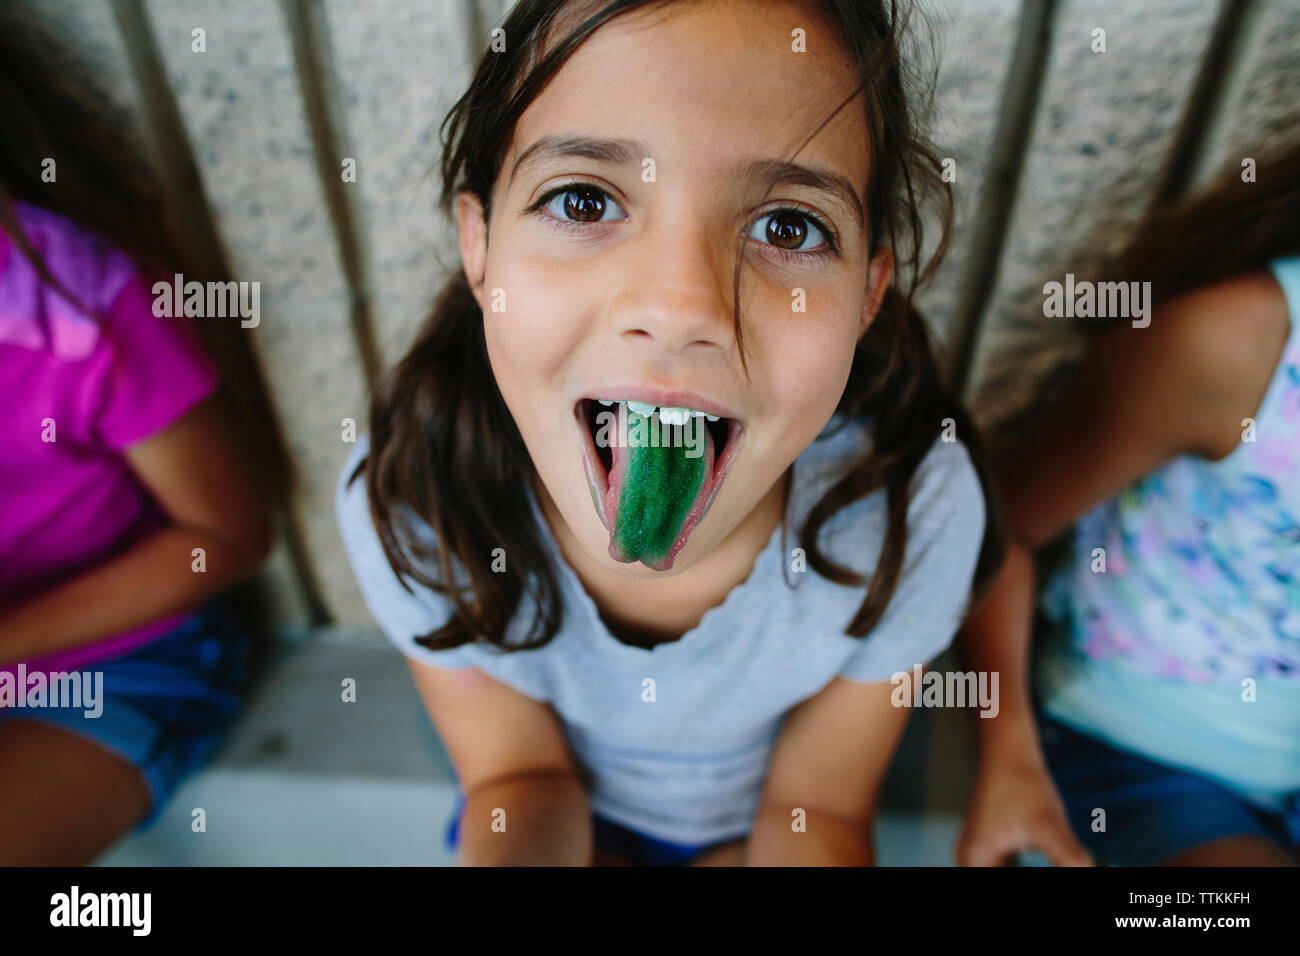 Portrait of girl showing green candy colored tongue Stock Photo